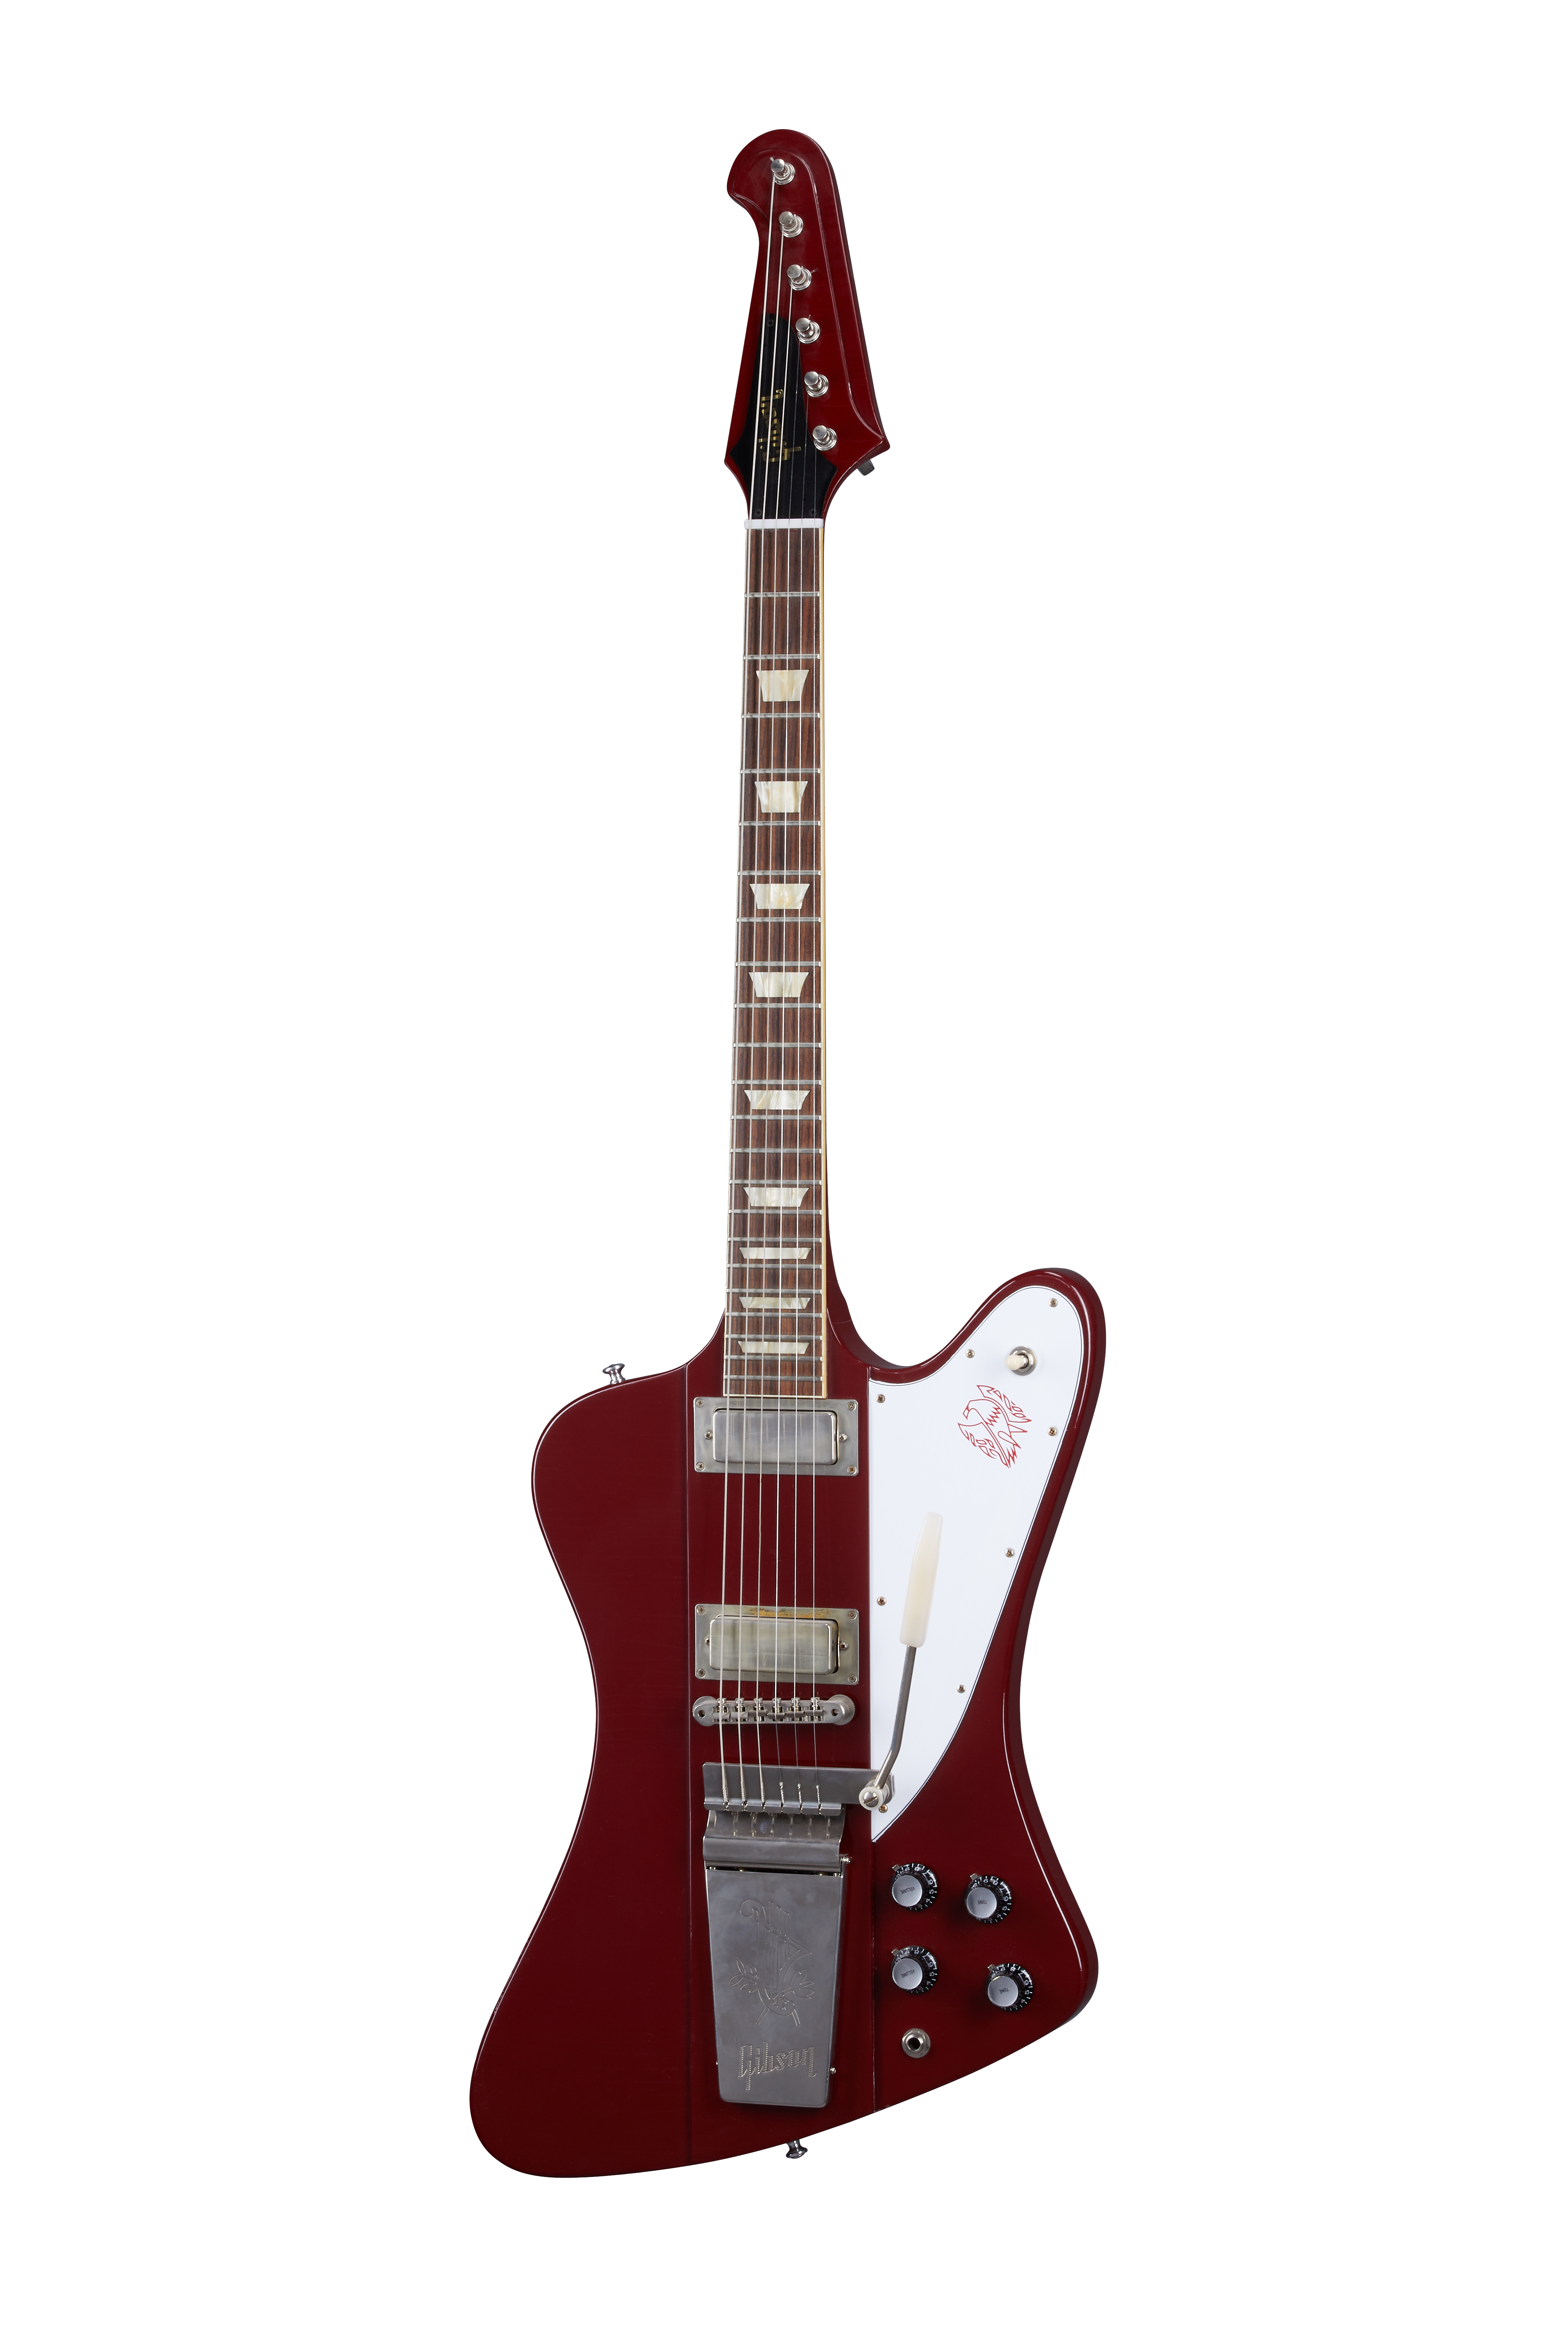 Maestro Red V Aged Vibrola With | Ultra Red Ember 1963 Ember Firebird Gibson Light